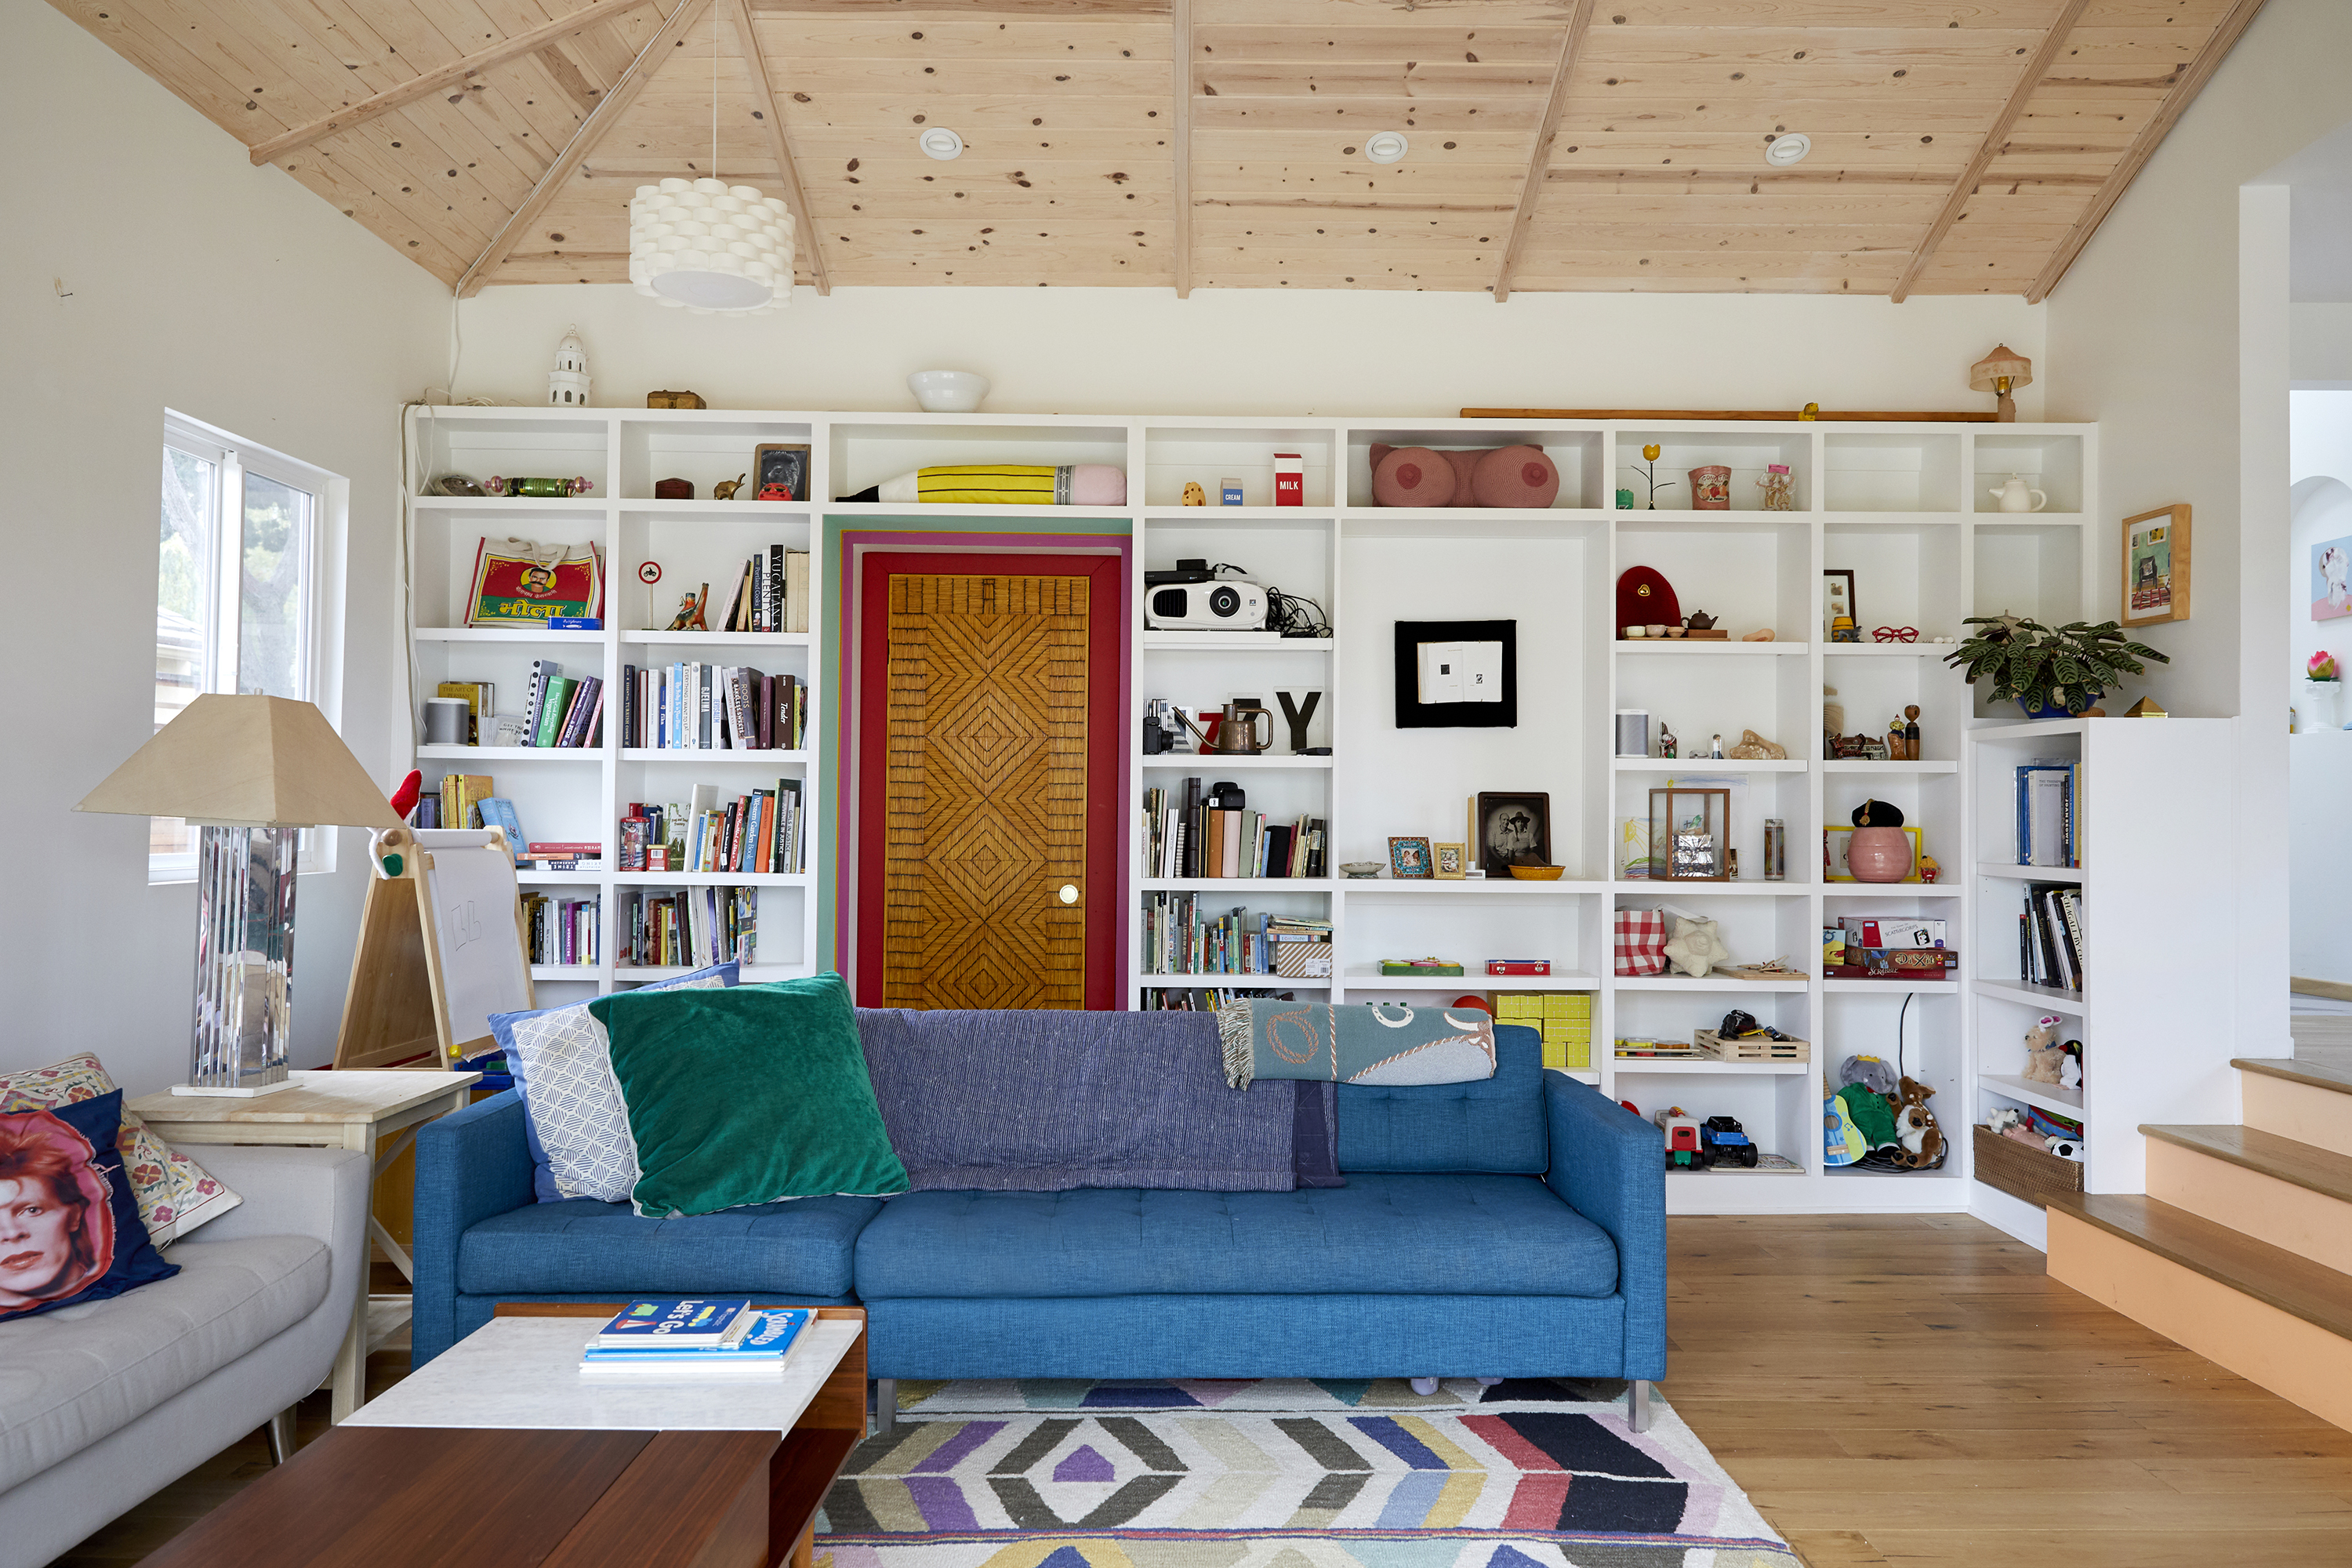 A living room with two couches. One couch is blue, the other couch is grey. On one of the walls are bookshelves full of books, and art. The bookcase surrounds a door with a painted red doorframe.